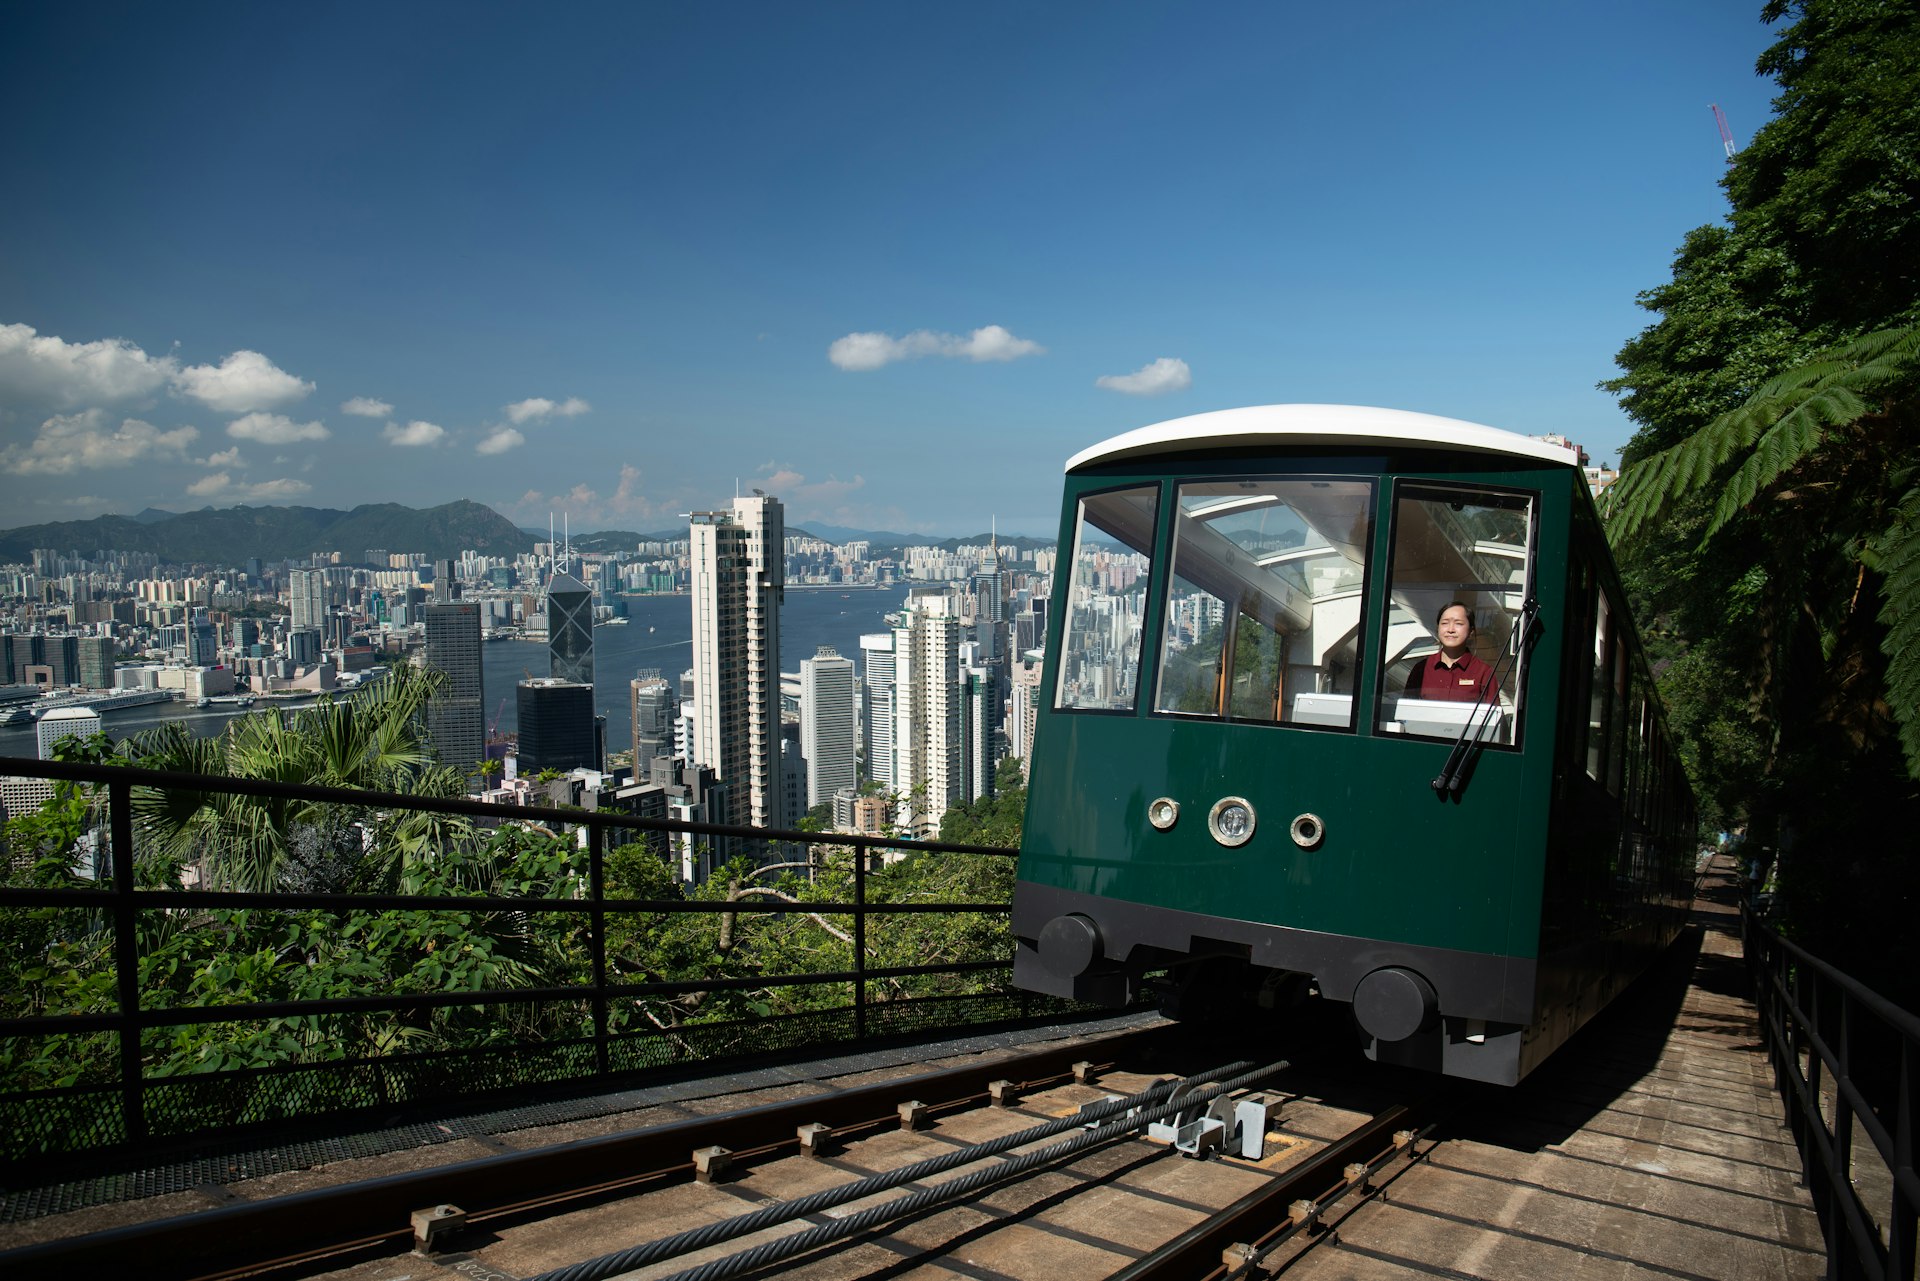 A funicular railway going up a steep incline surrounded by foliage. The tram is green with a glass roof